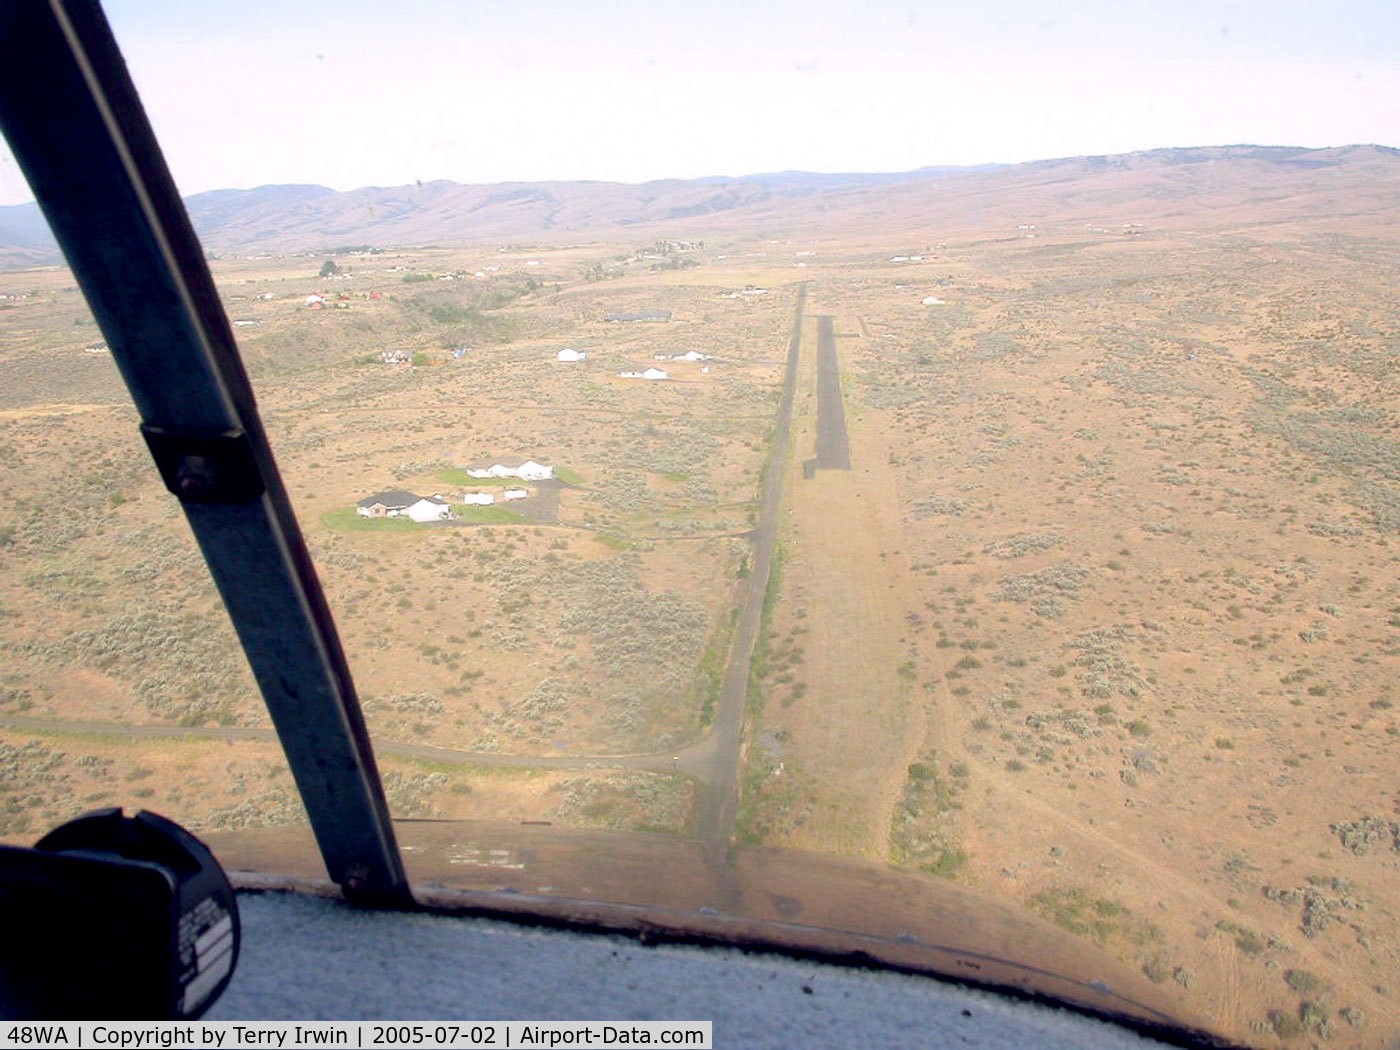 West Valley Airport (48WA) - On approach (with Tim Robel) from the east looking west. The airstrip rises to meet you at about a 2.4% rise or 100' rise in the 2,400' length. More hangar/homes have been built since this photo was taken.